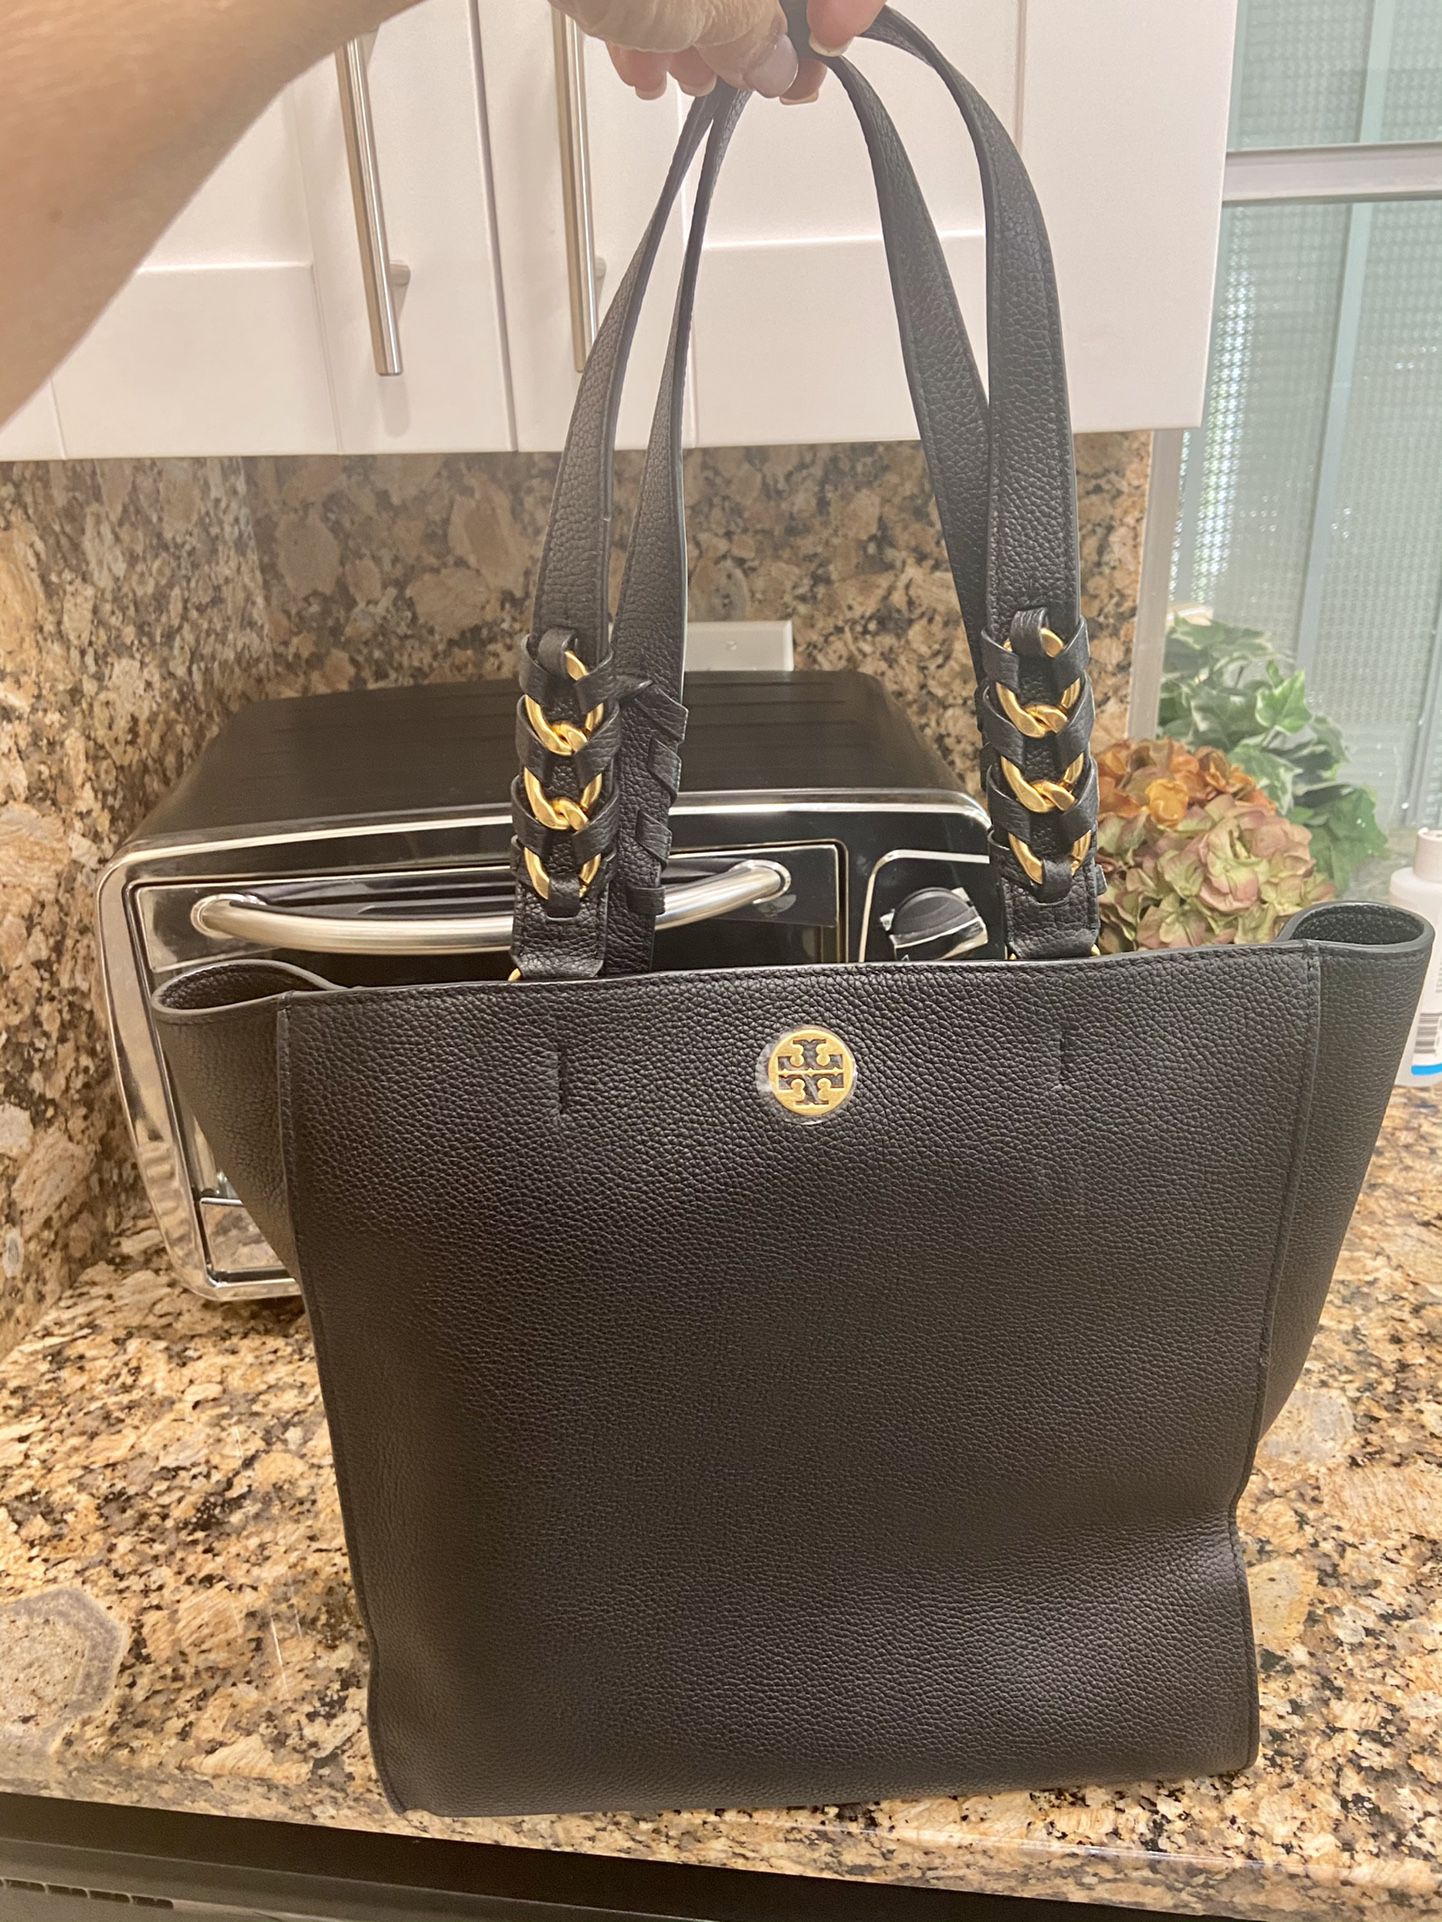 Tory Burch Large Tote Purse